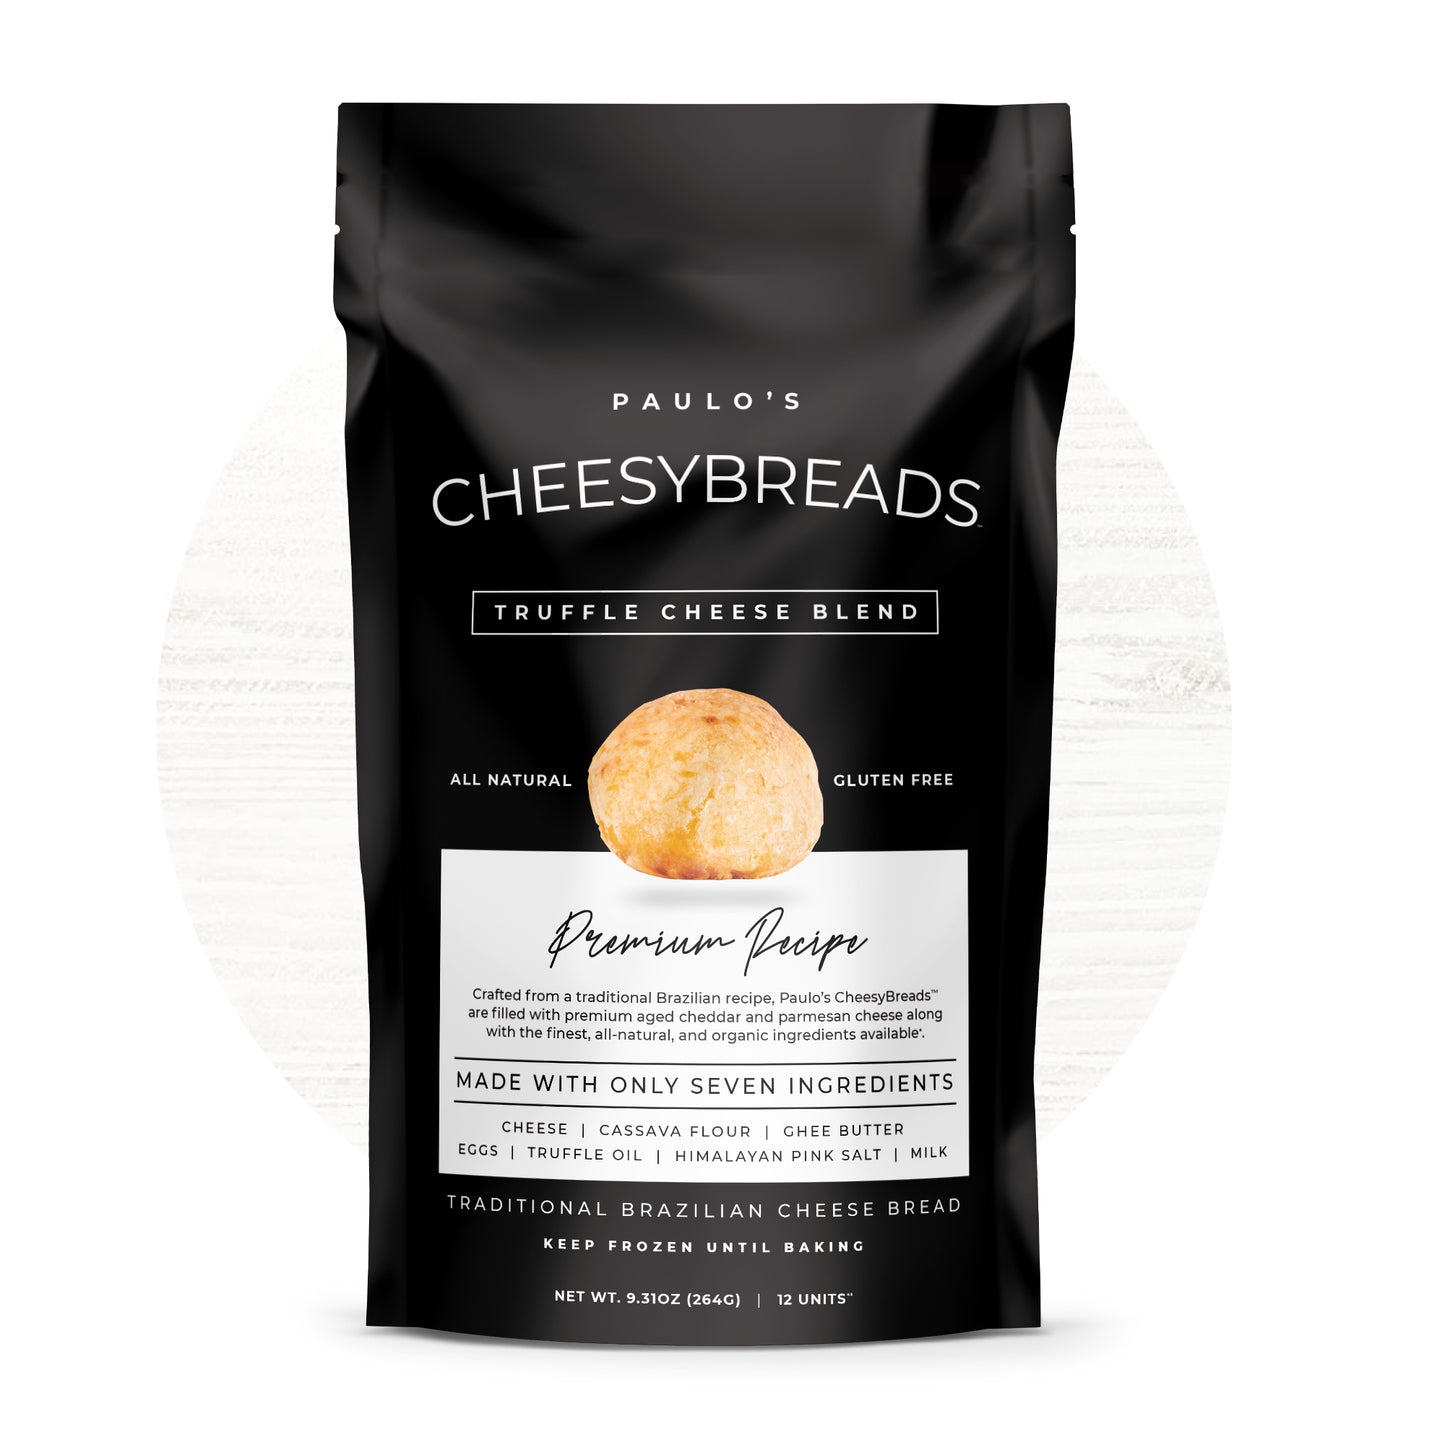 Paulo's Cheesybreads Truffle Cheese Blend